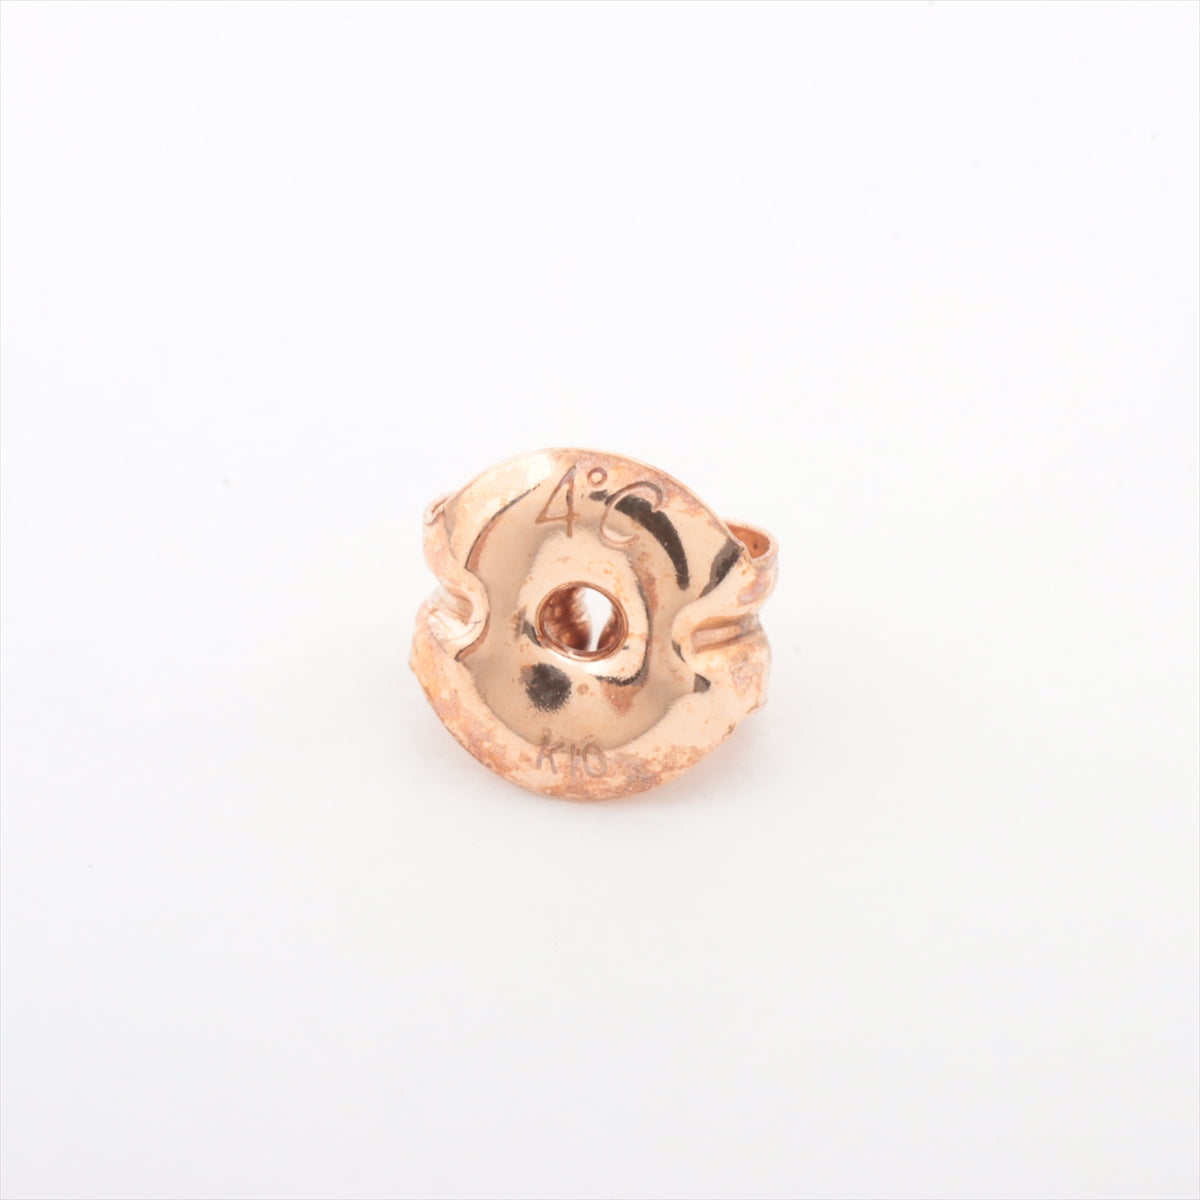 4℃ Colored stone Piercing jewelry K10(PG) 0.9g